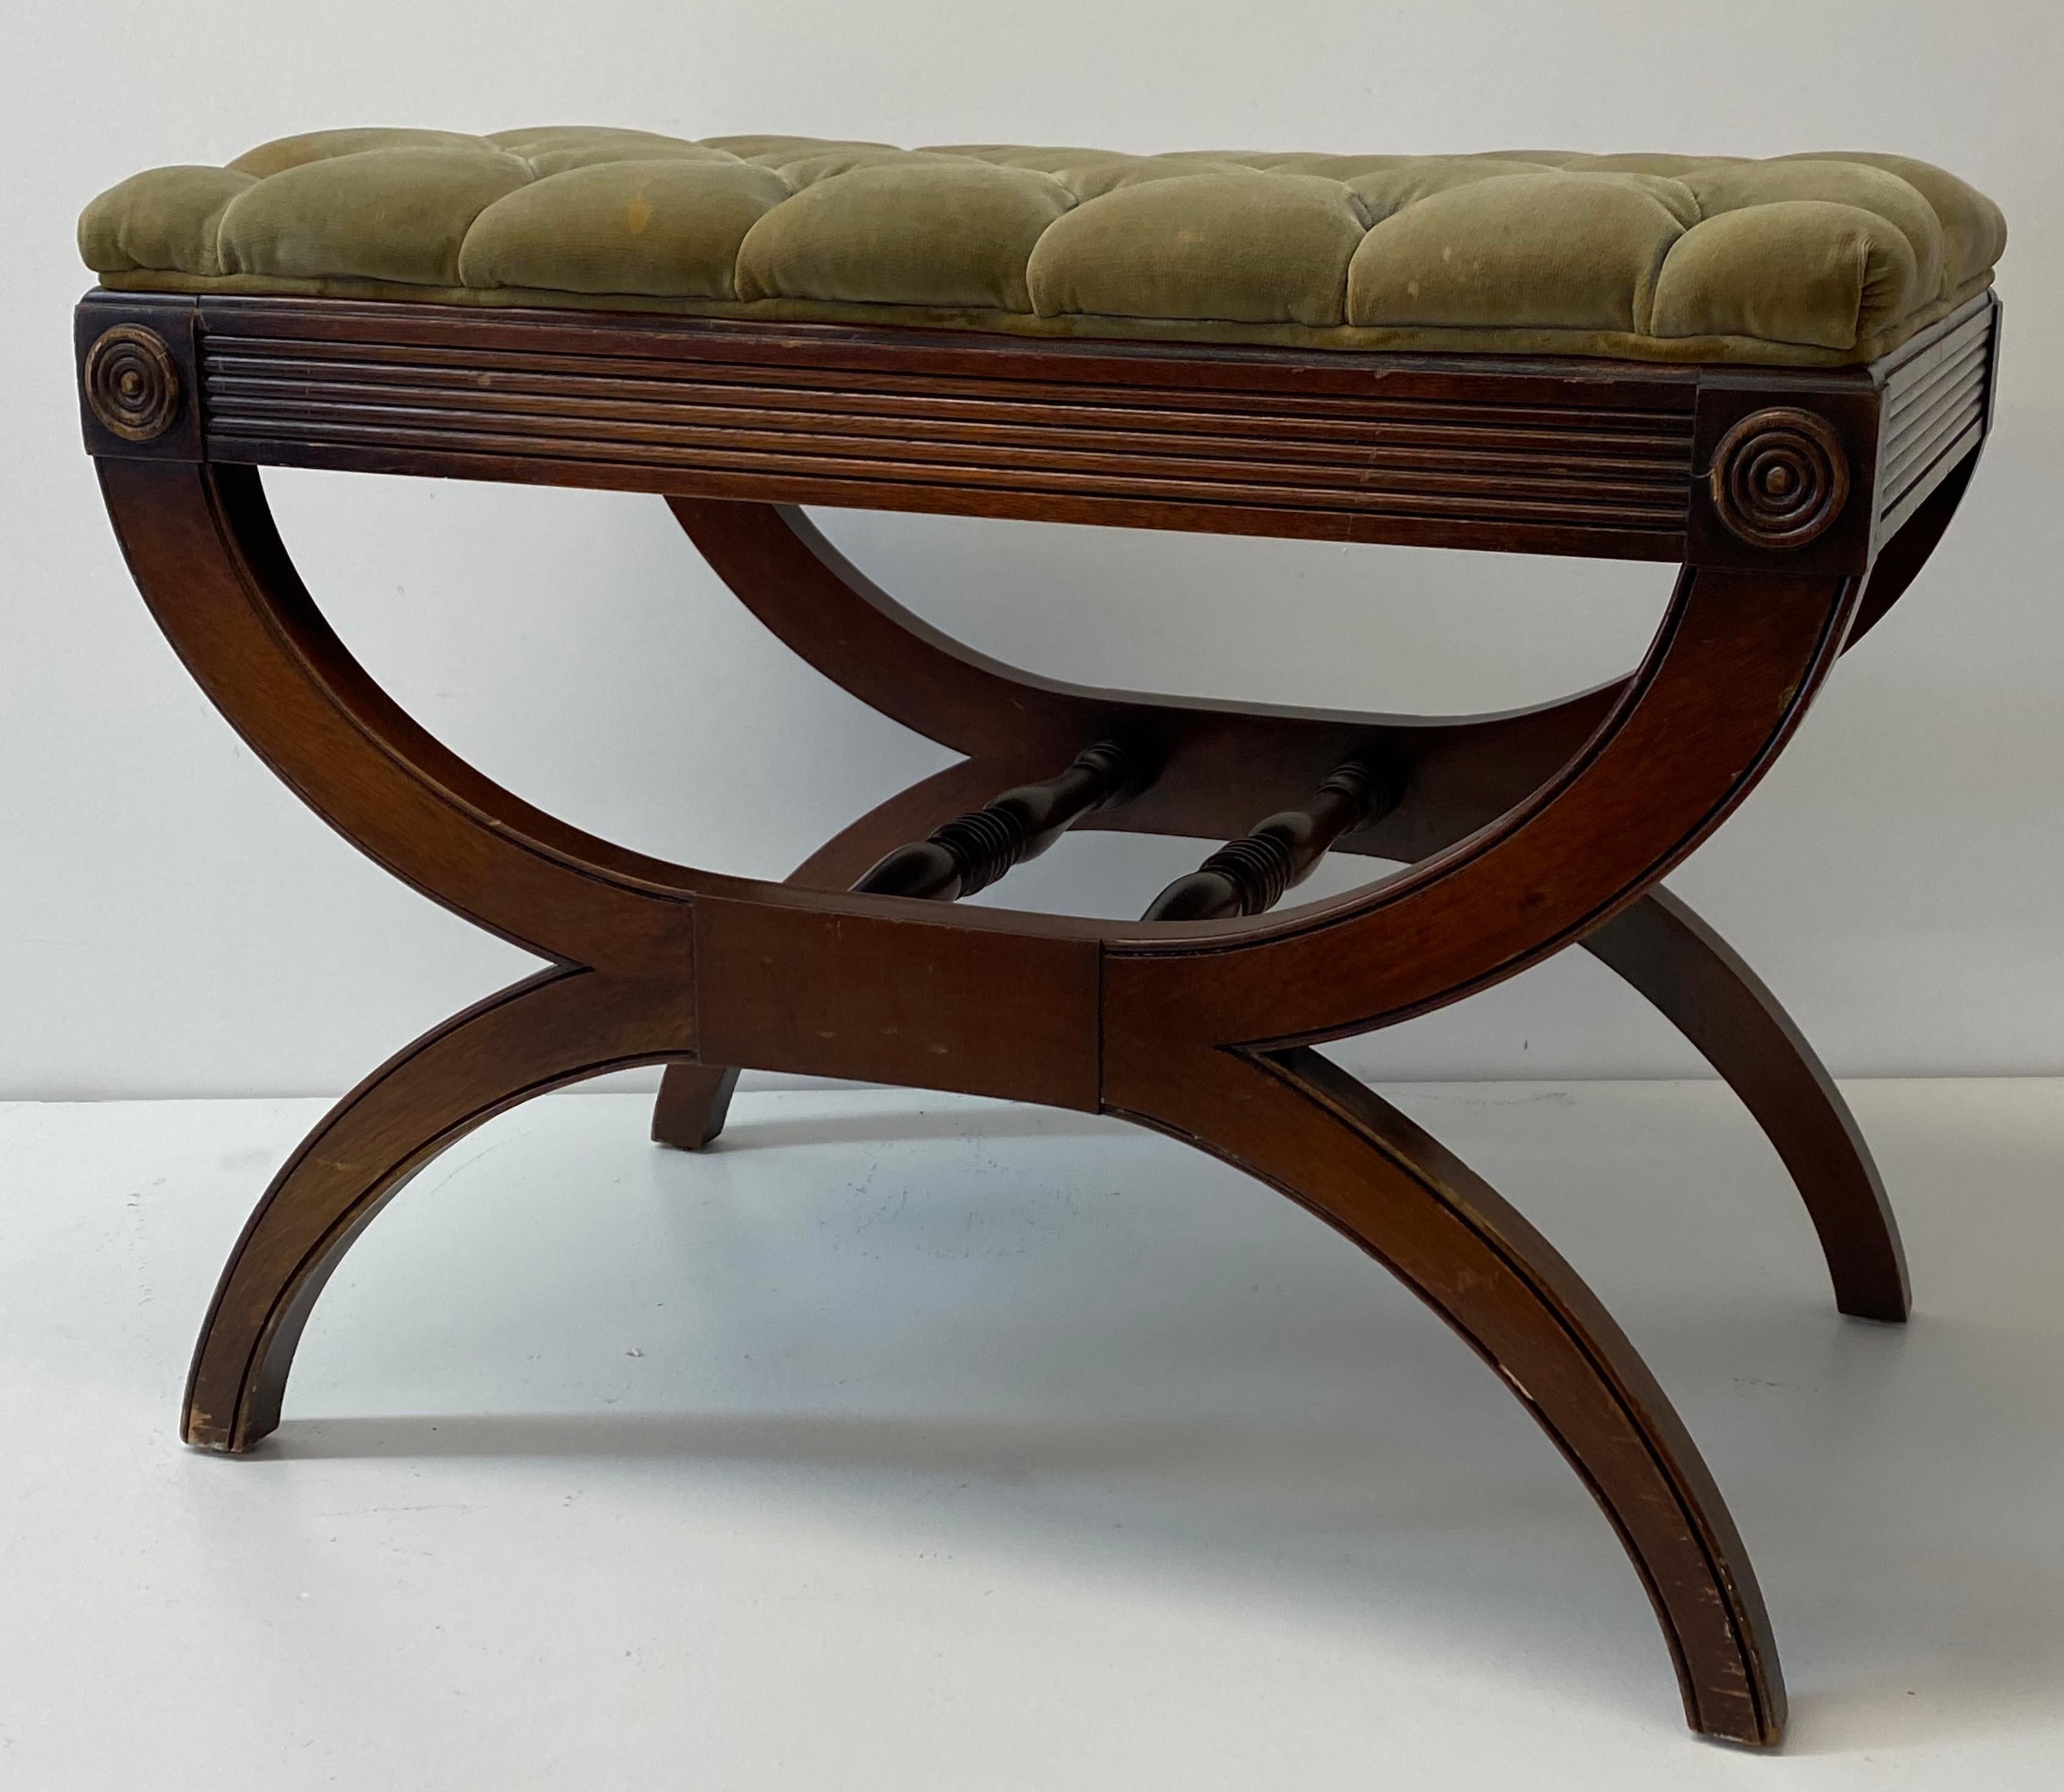 Vintage Mahogany & Tufted Upholstery Crule Bench, C.1930s 1